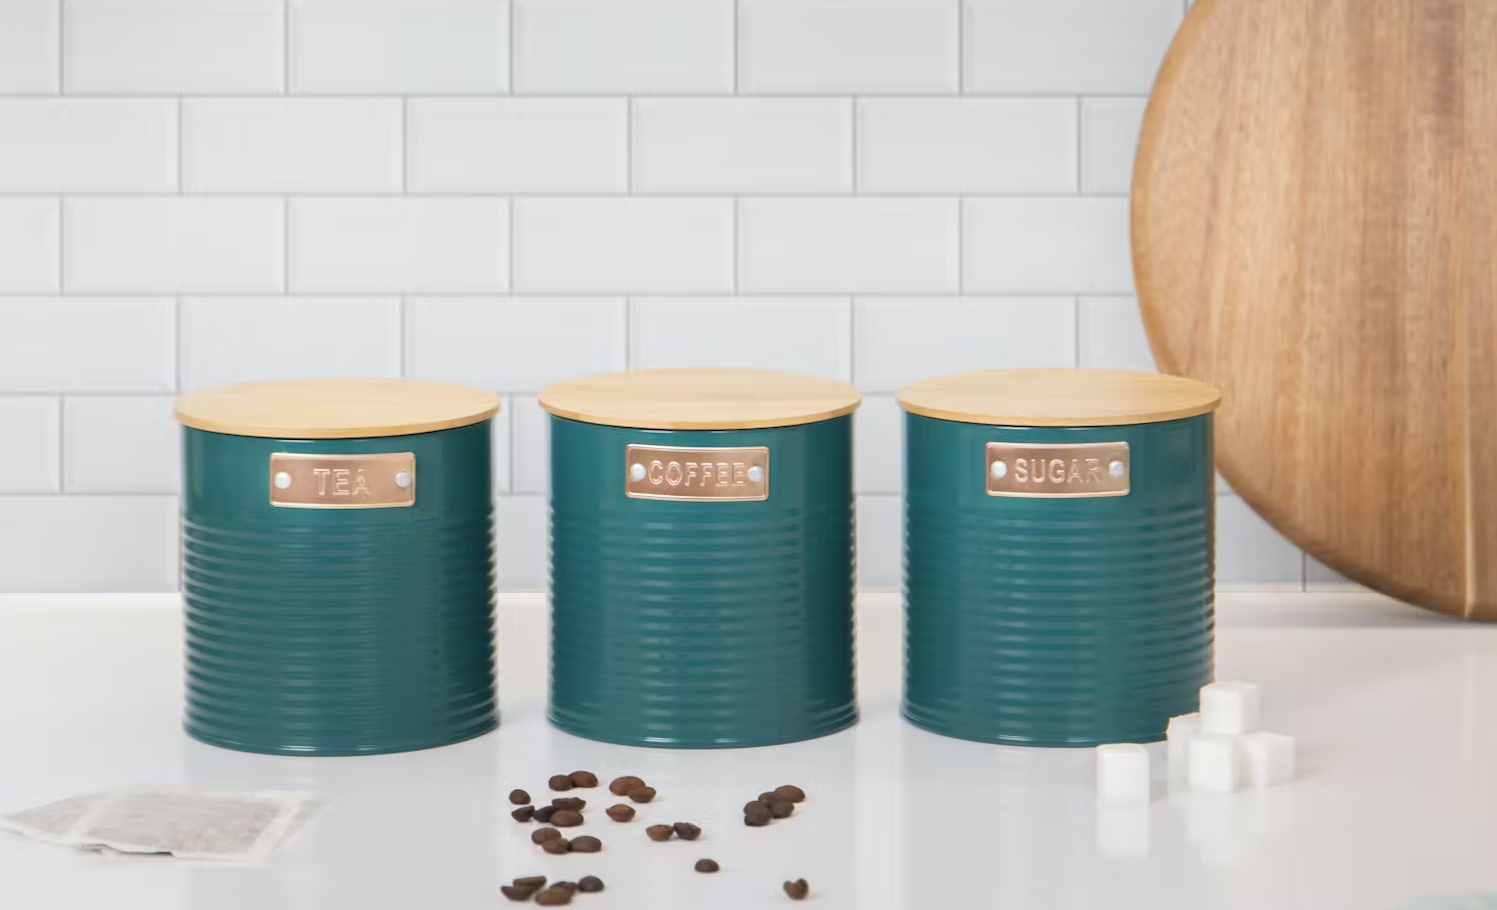 KitchenCraft Tea, Coffee and Sugar Storage Canisters Set of 3 - Teal